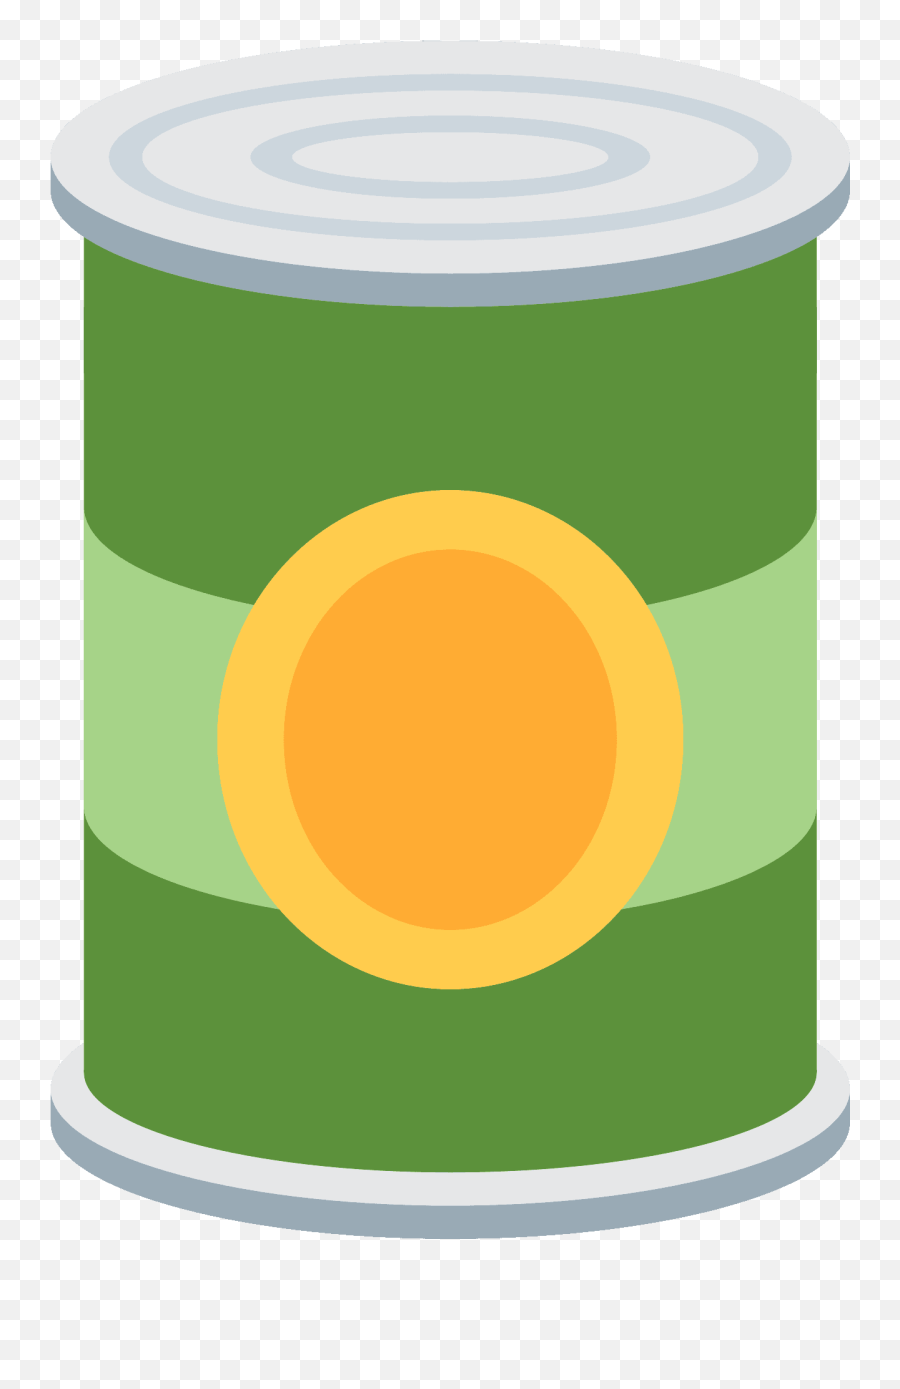 Canned Food Emoji Clipart - Canned Food Emoji,Canned Food Clipart